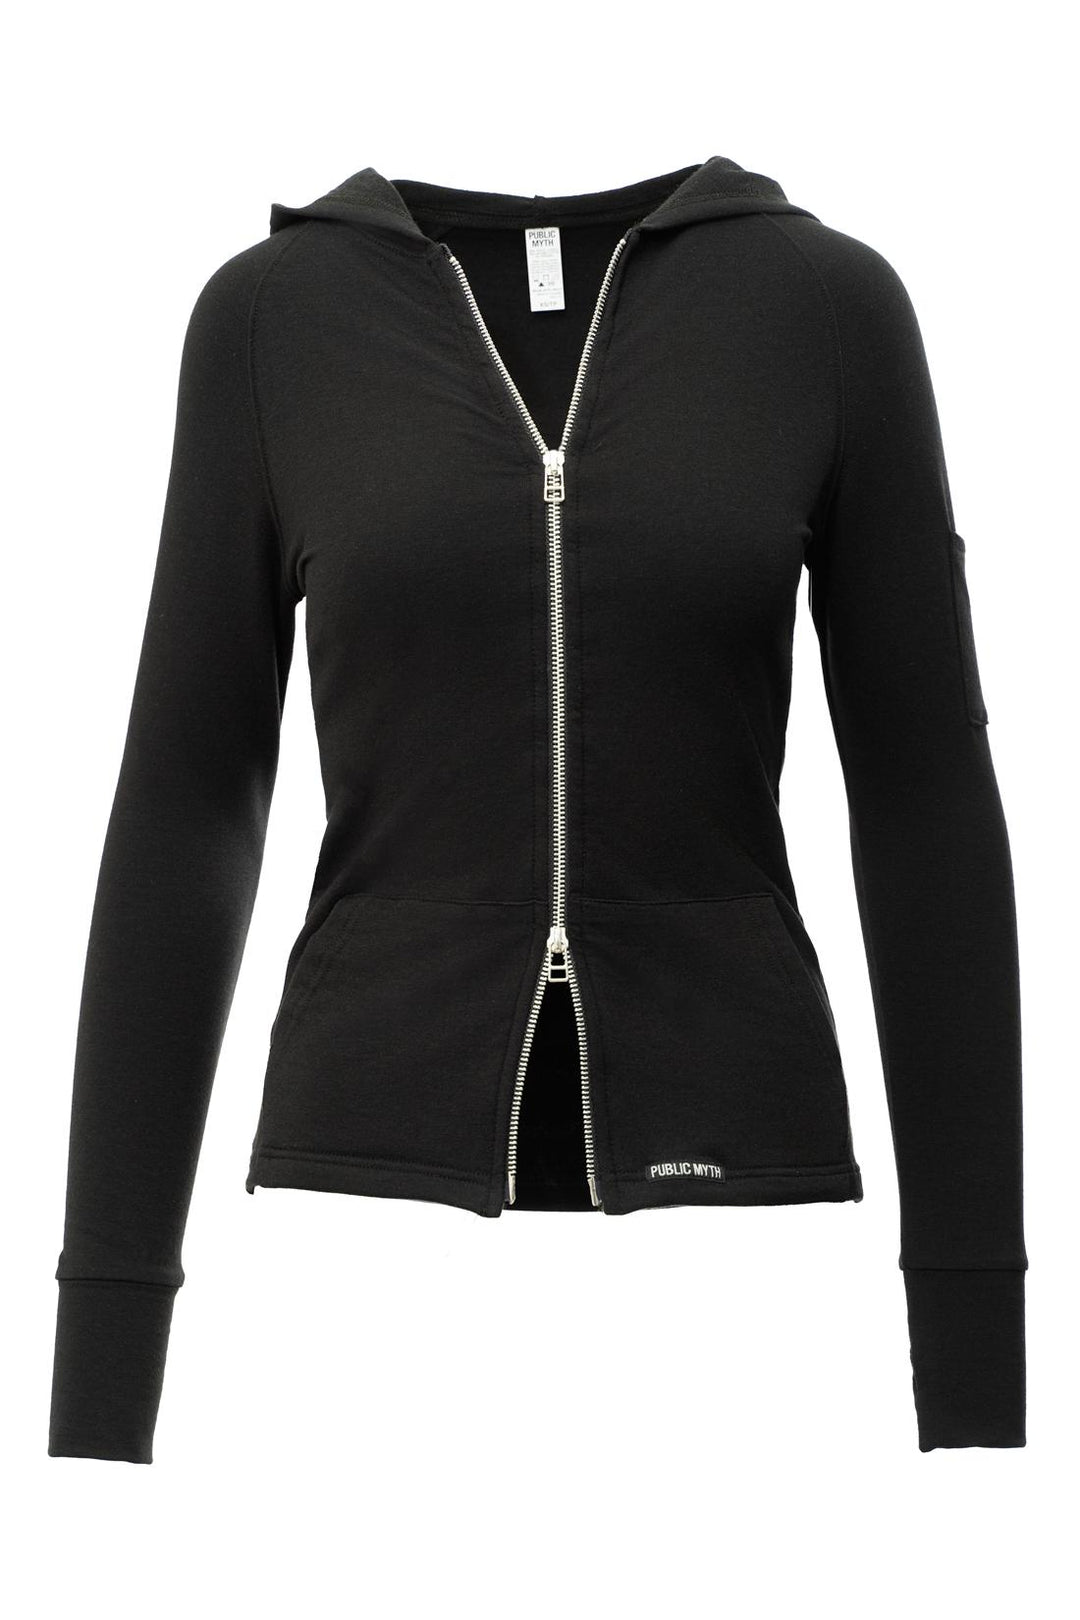 Women's Black Zip Up Fitted Workout Jacket with Thumbholes